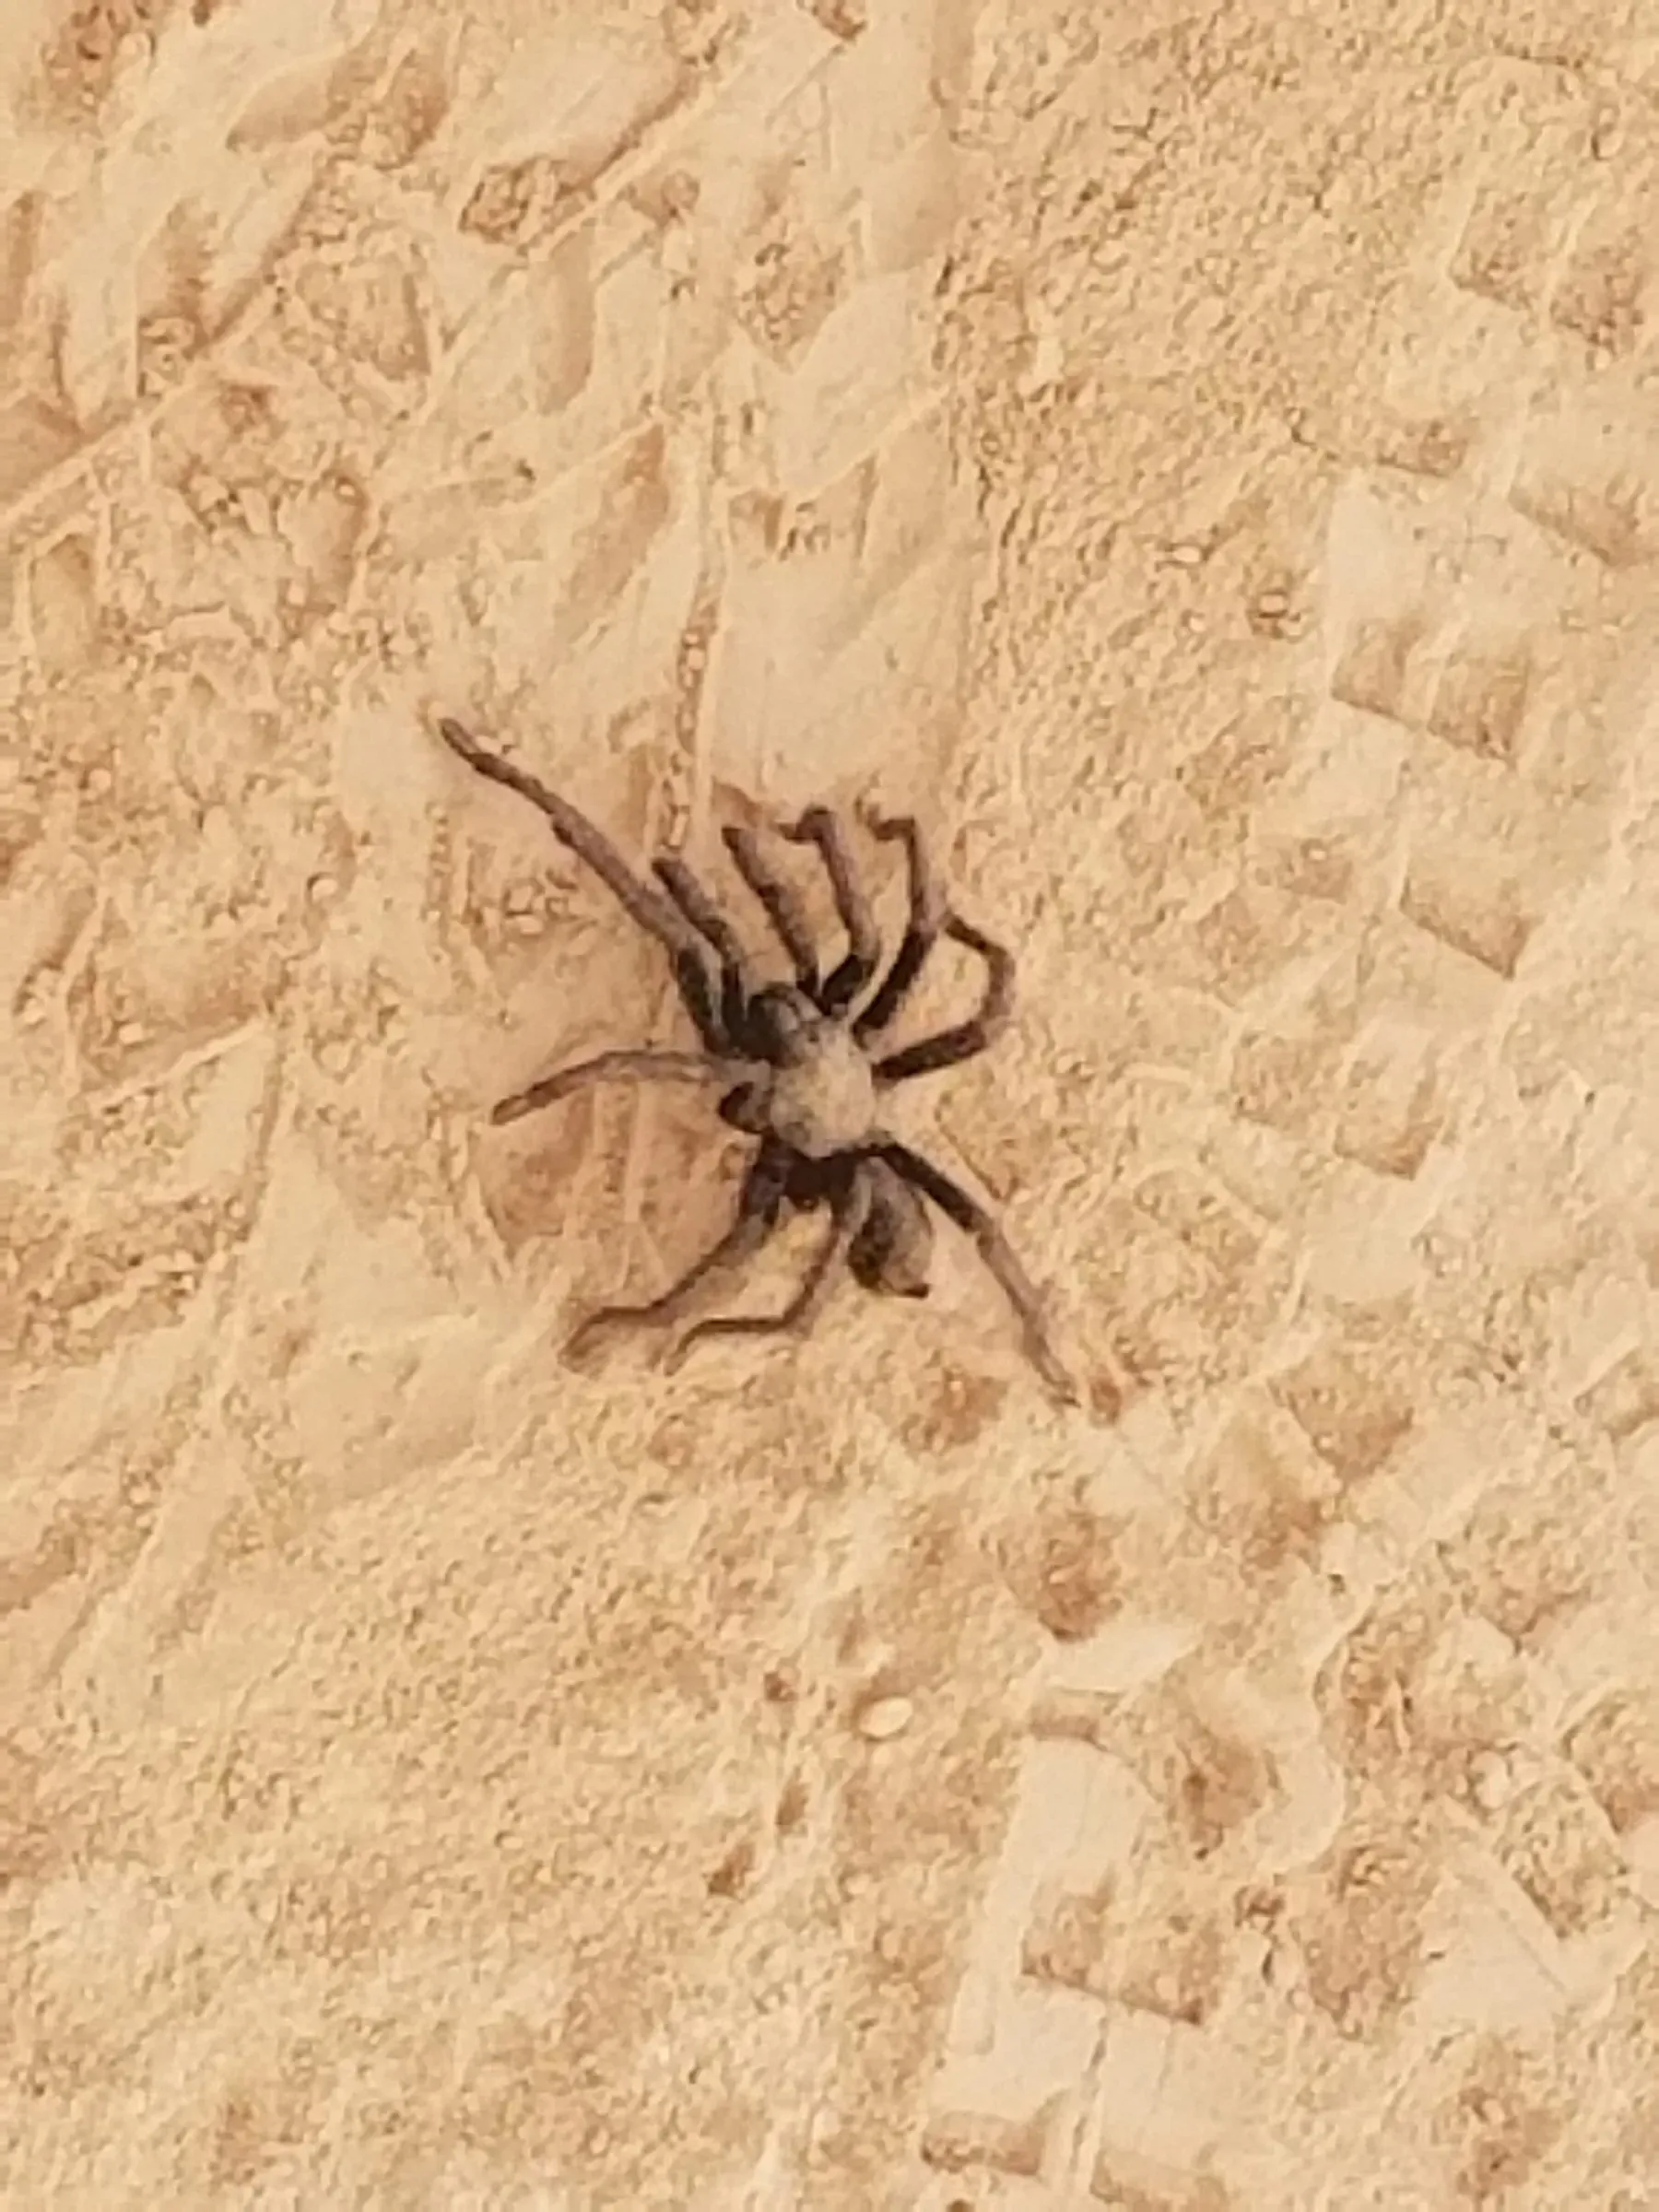 We found a large tarantula walking across the trail system!